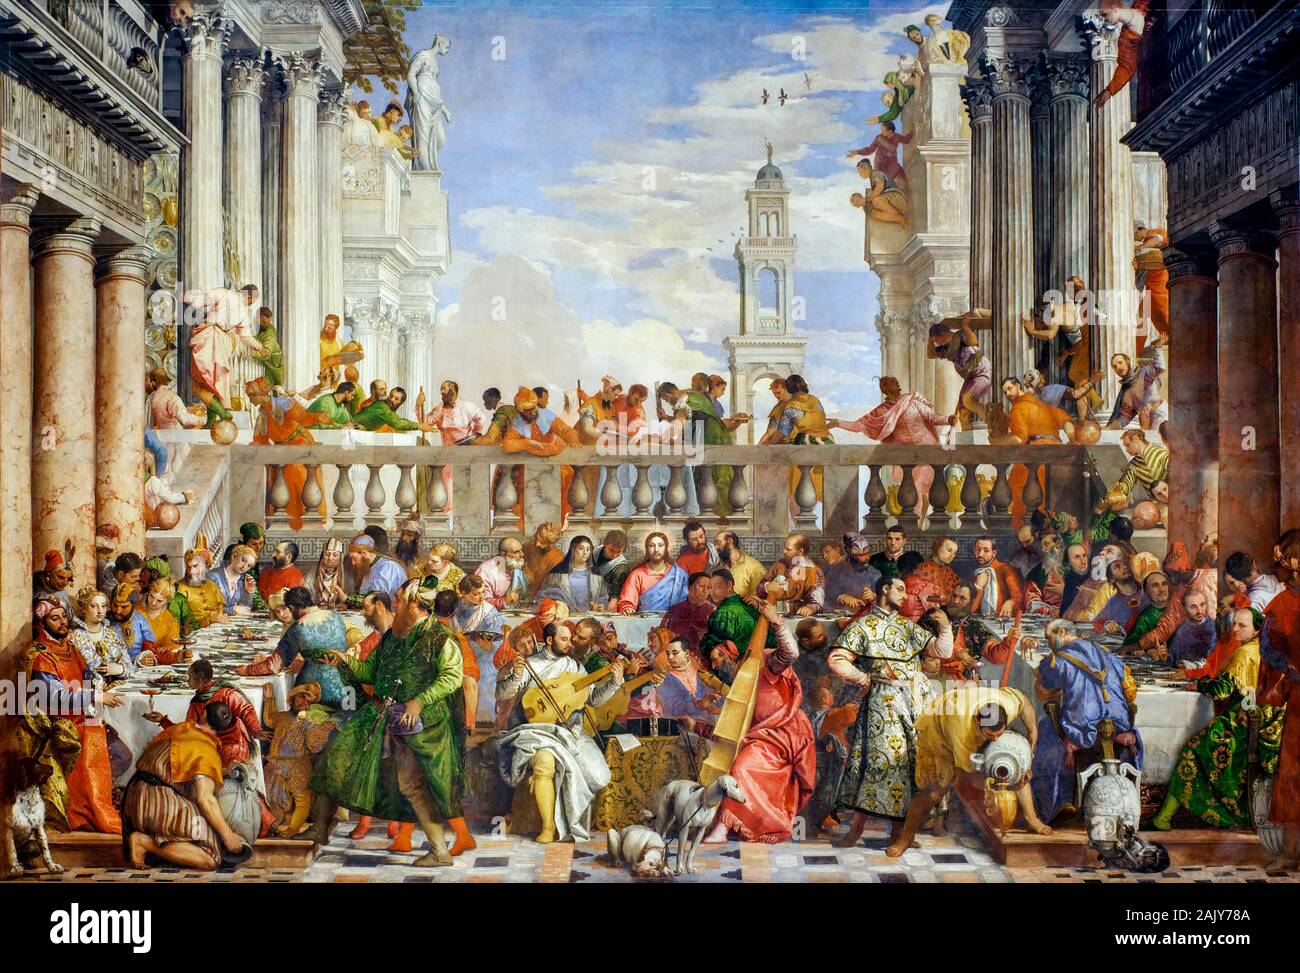 Paolo Veronese, The Wedding Feast at Cana, (The Wedding at Cana), Renaissance painting, 1562-1563 Stock Photo